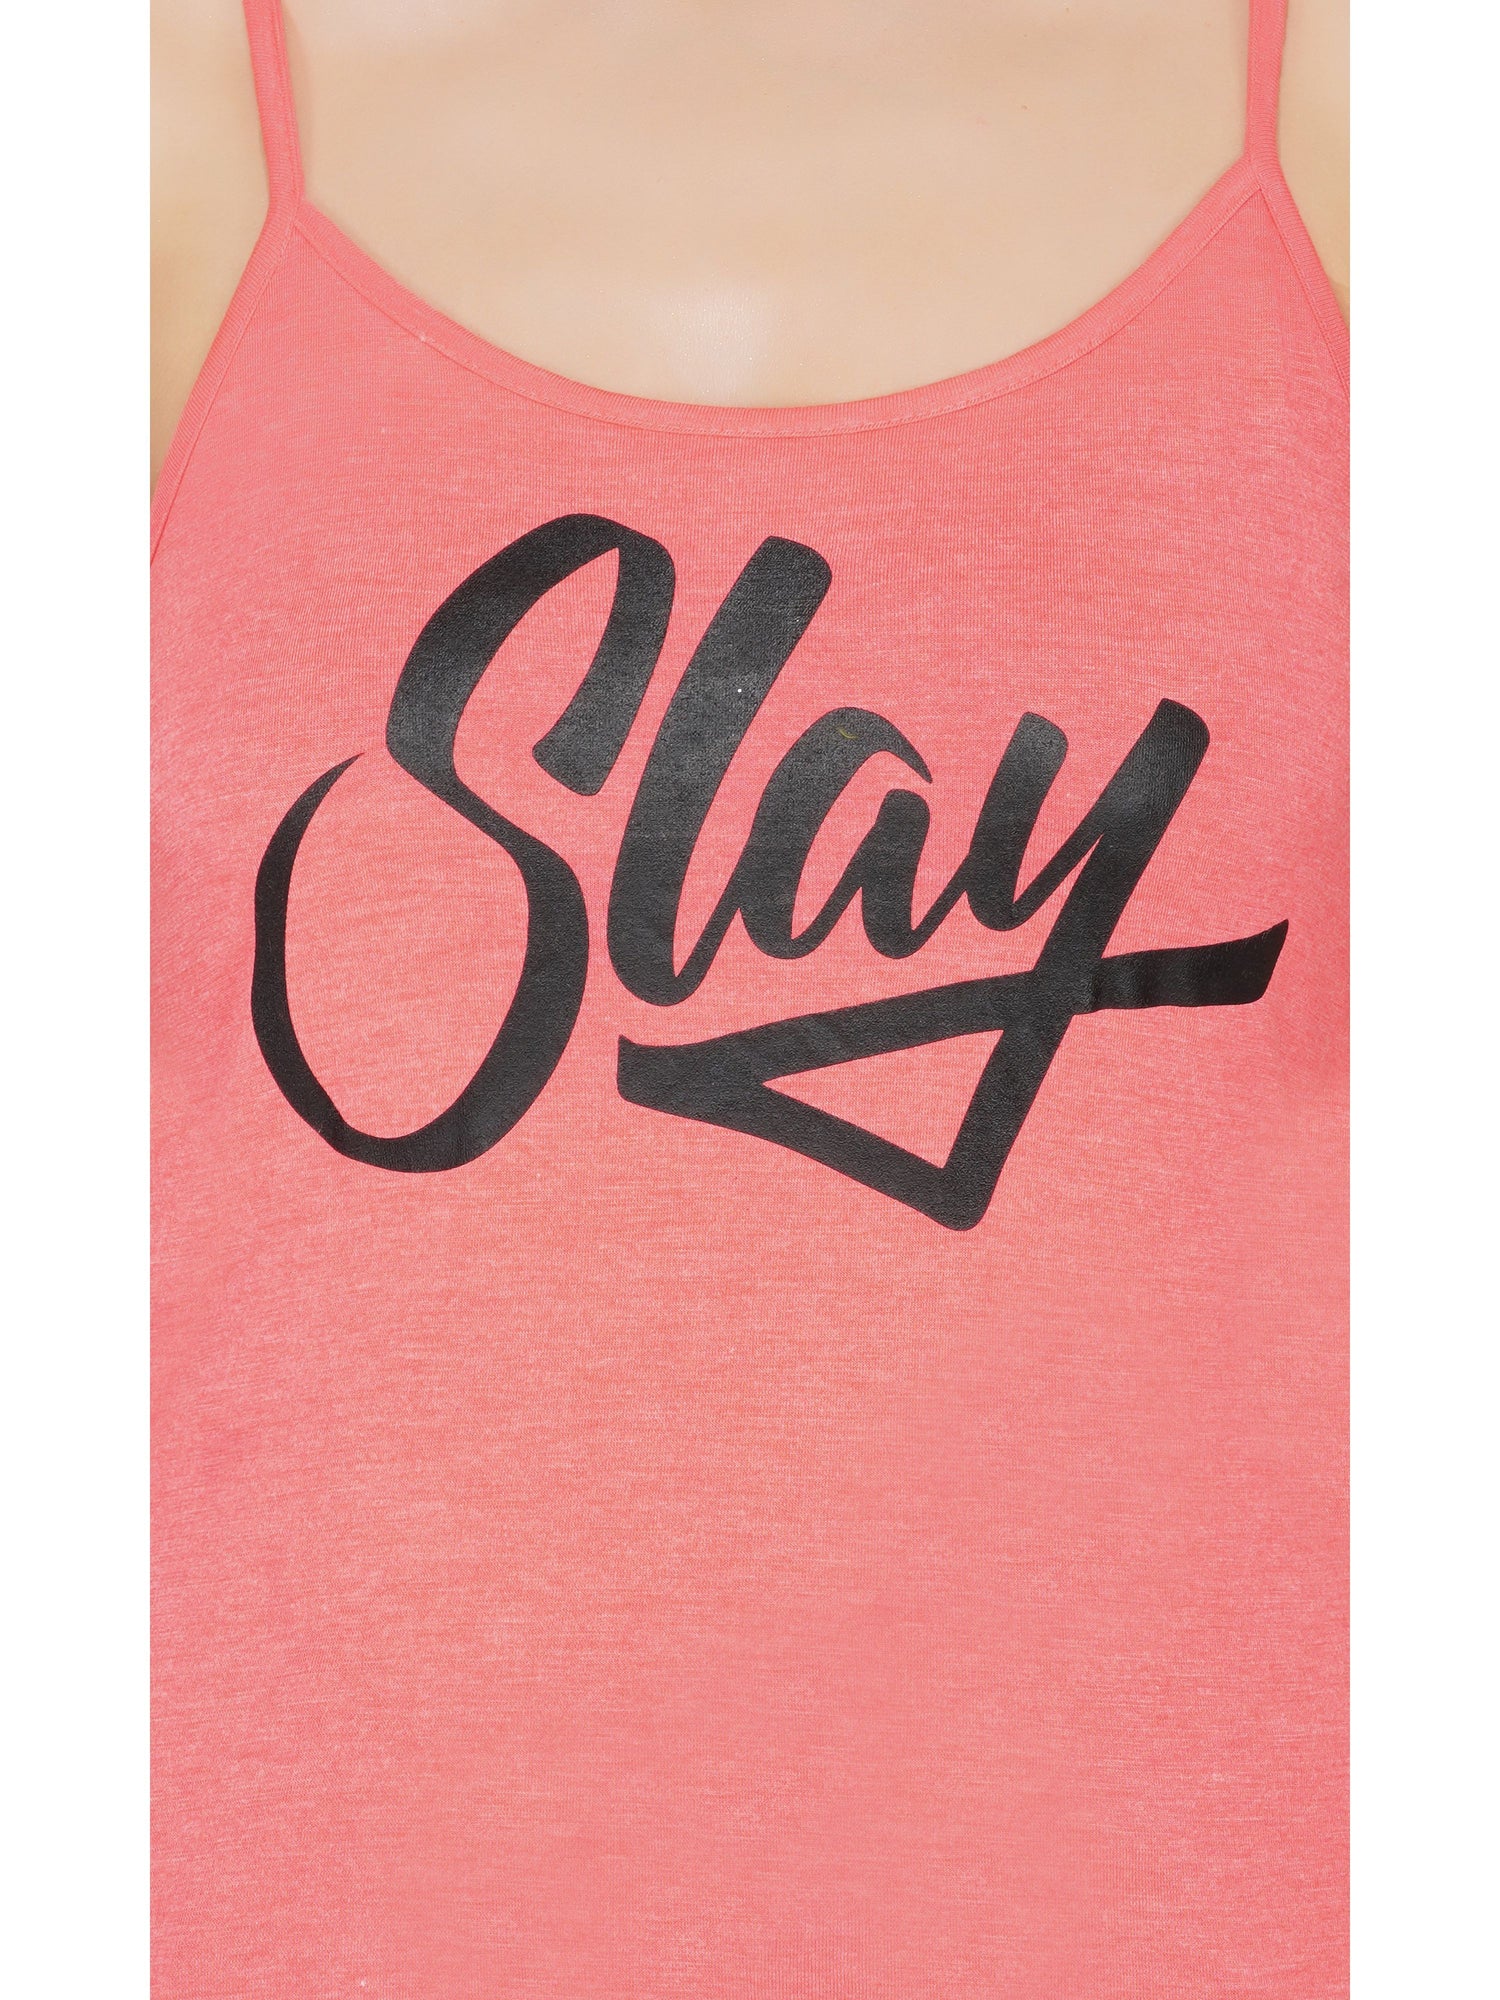 SLAY. Women's Neon Pink Printed Camisole-clothing-to-slay.myshopify.com-Camisole Top